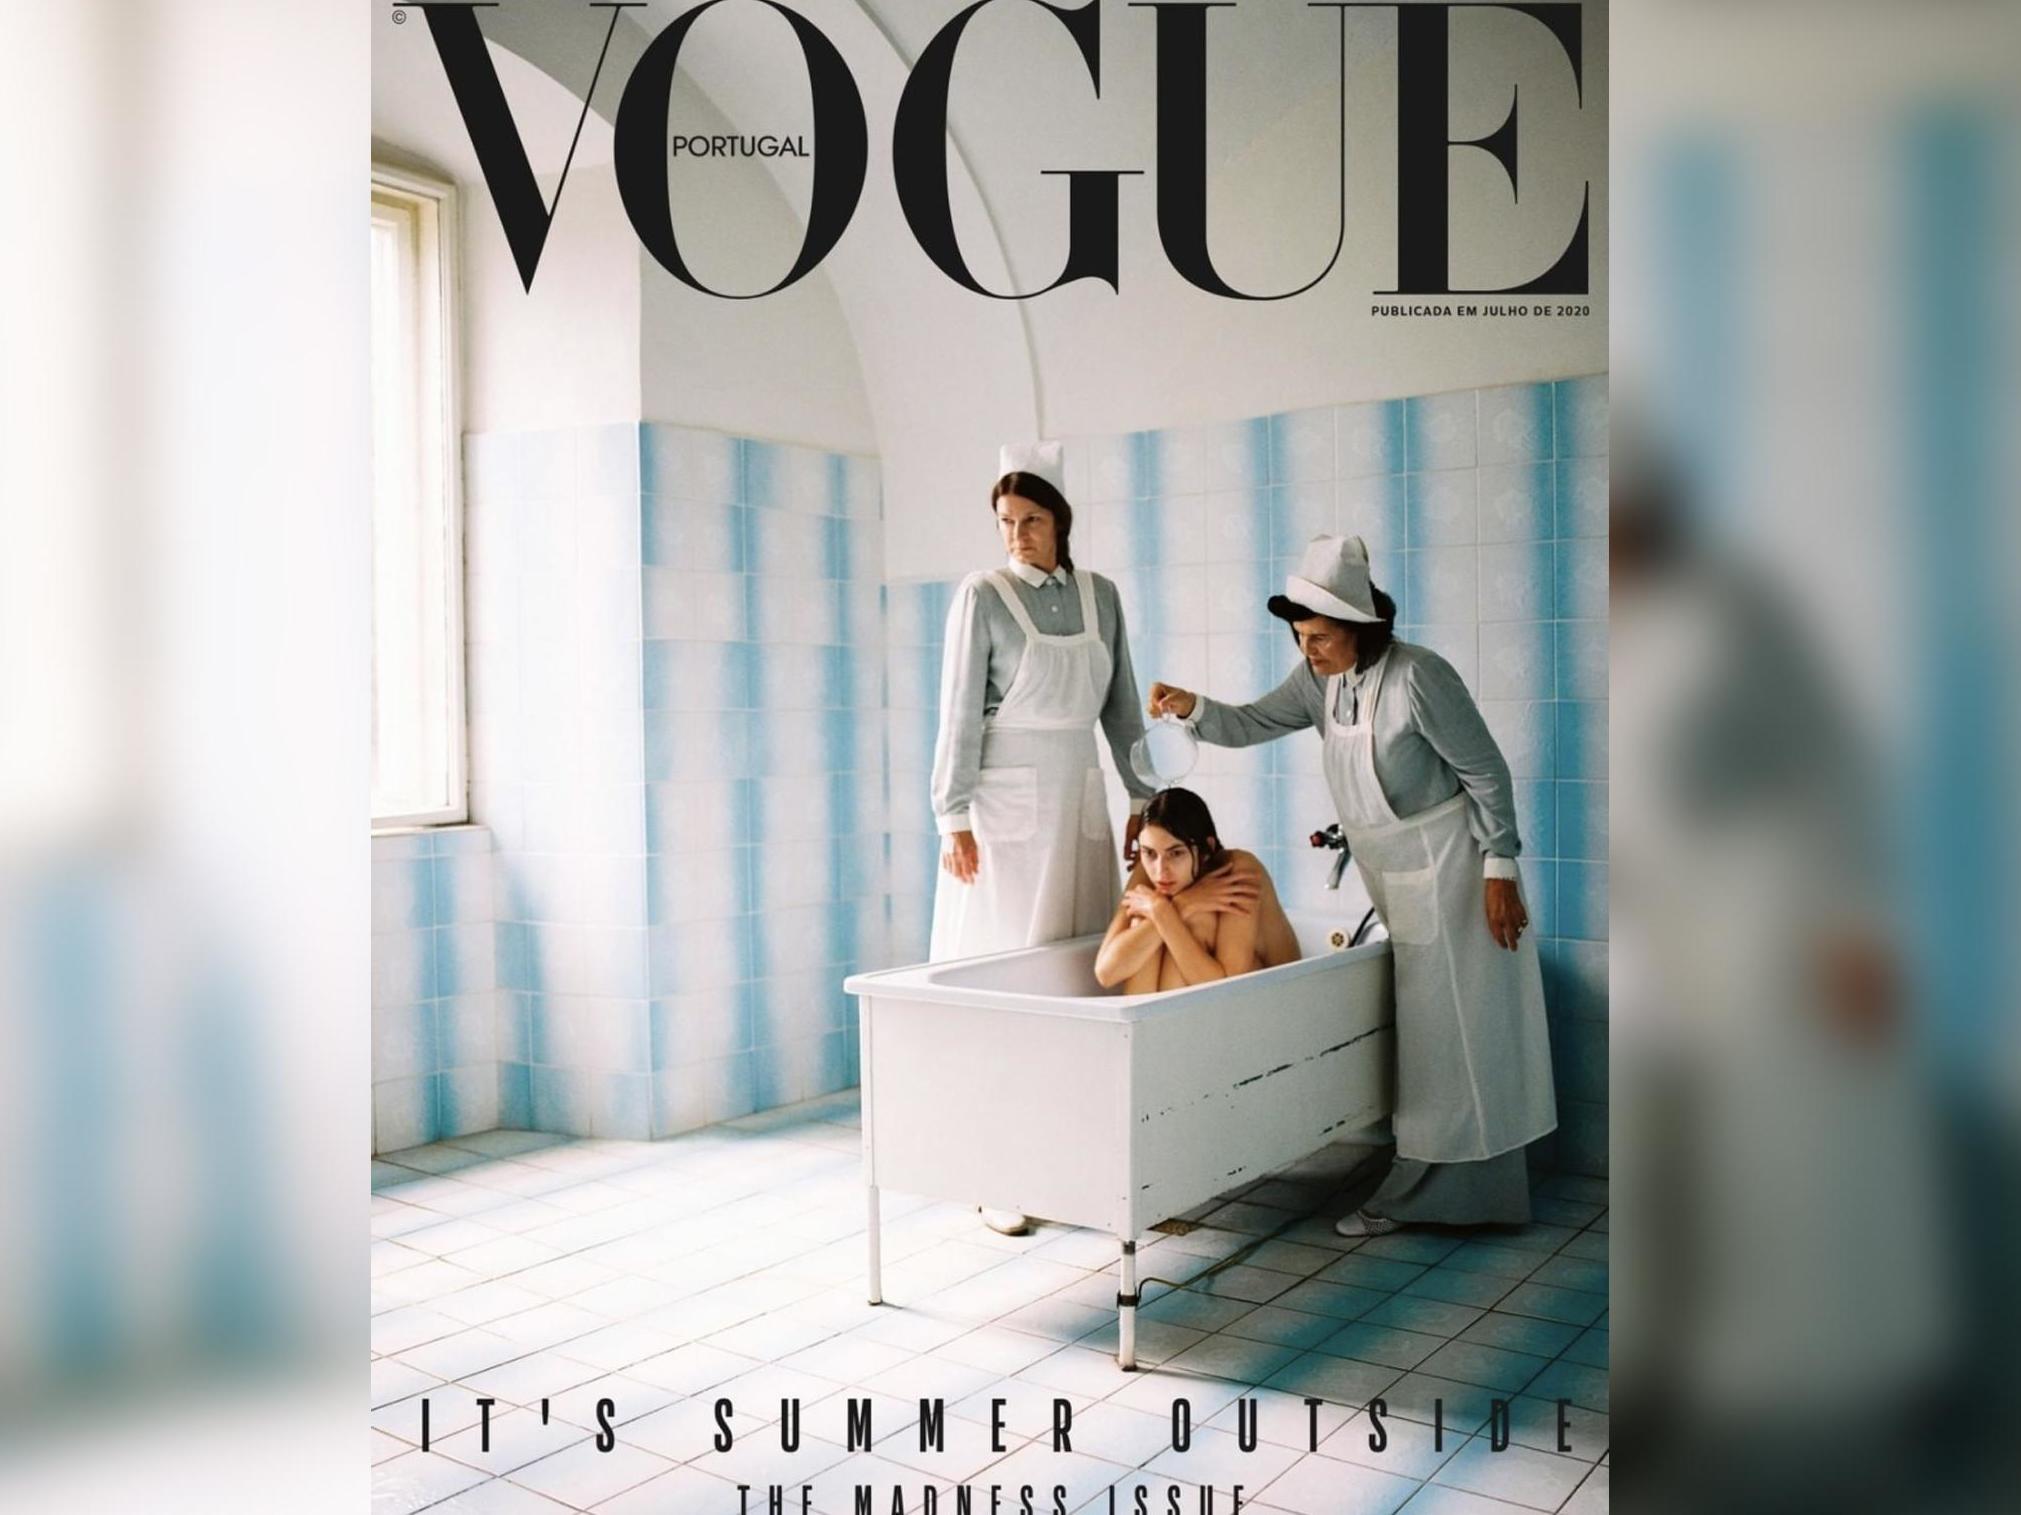 Disappointing and outdated': Vogue Portugal criticised for